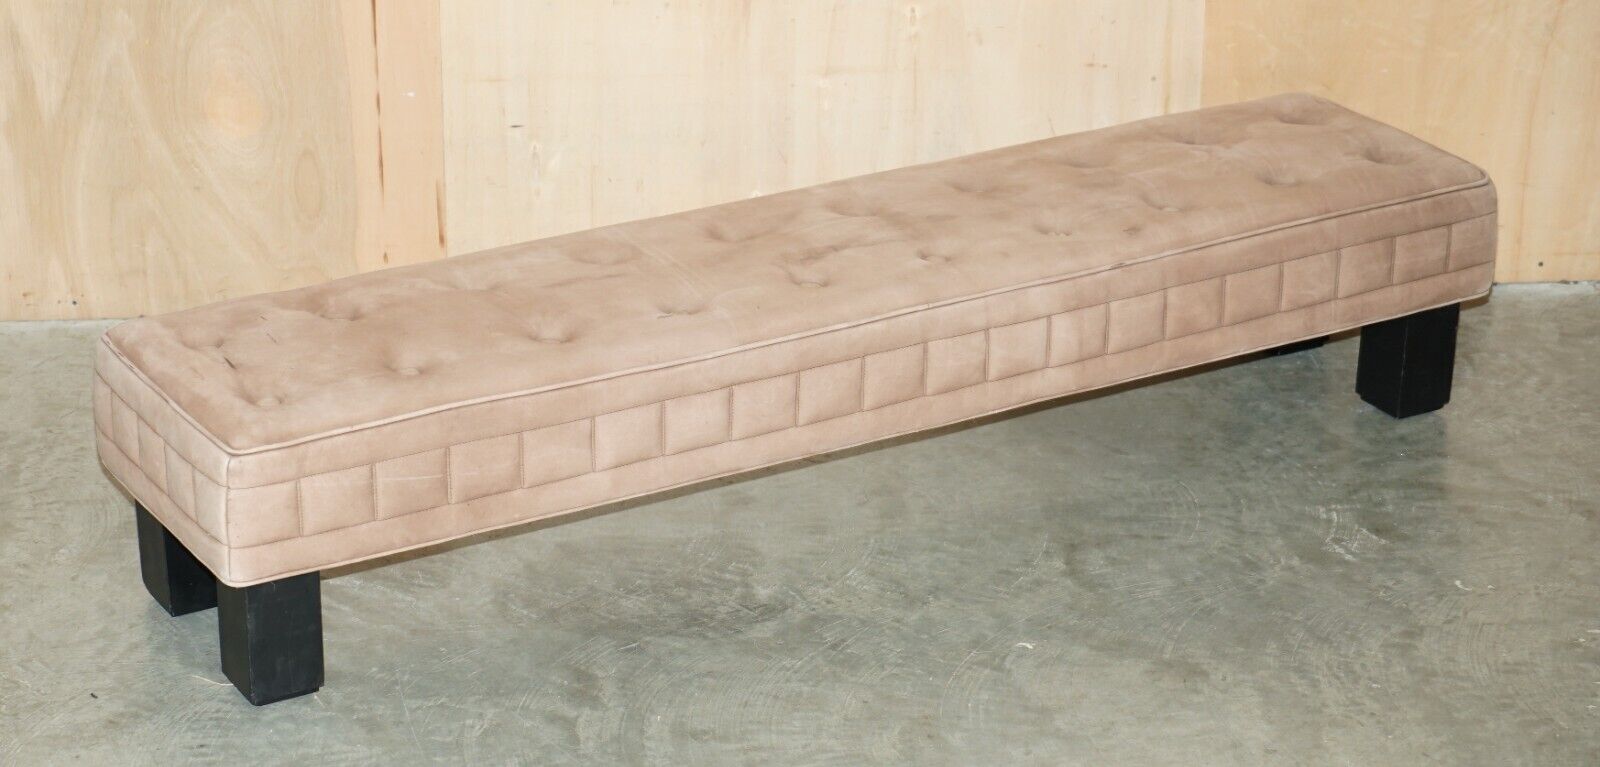 BROWN SUEDE LEATHER JOSEF HOFFMANN 1905 PALAIS STOCLET 2 METER HEARTH FOOTSTOOL